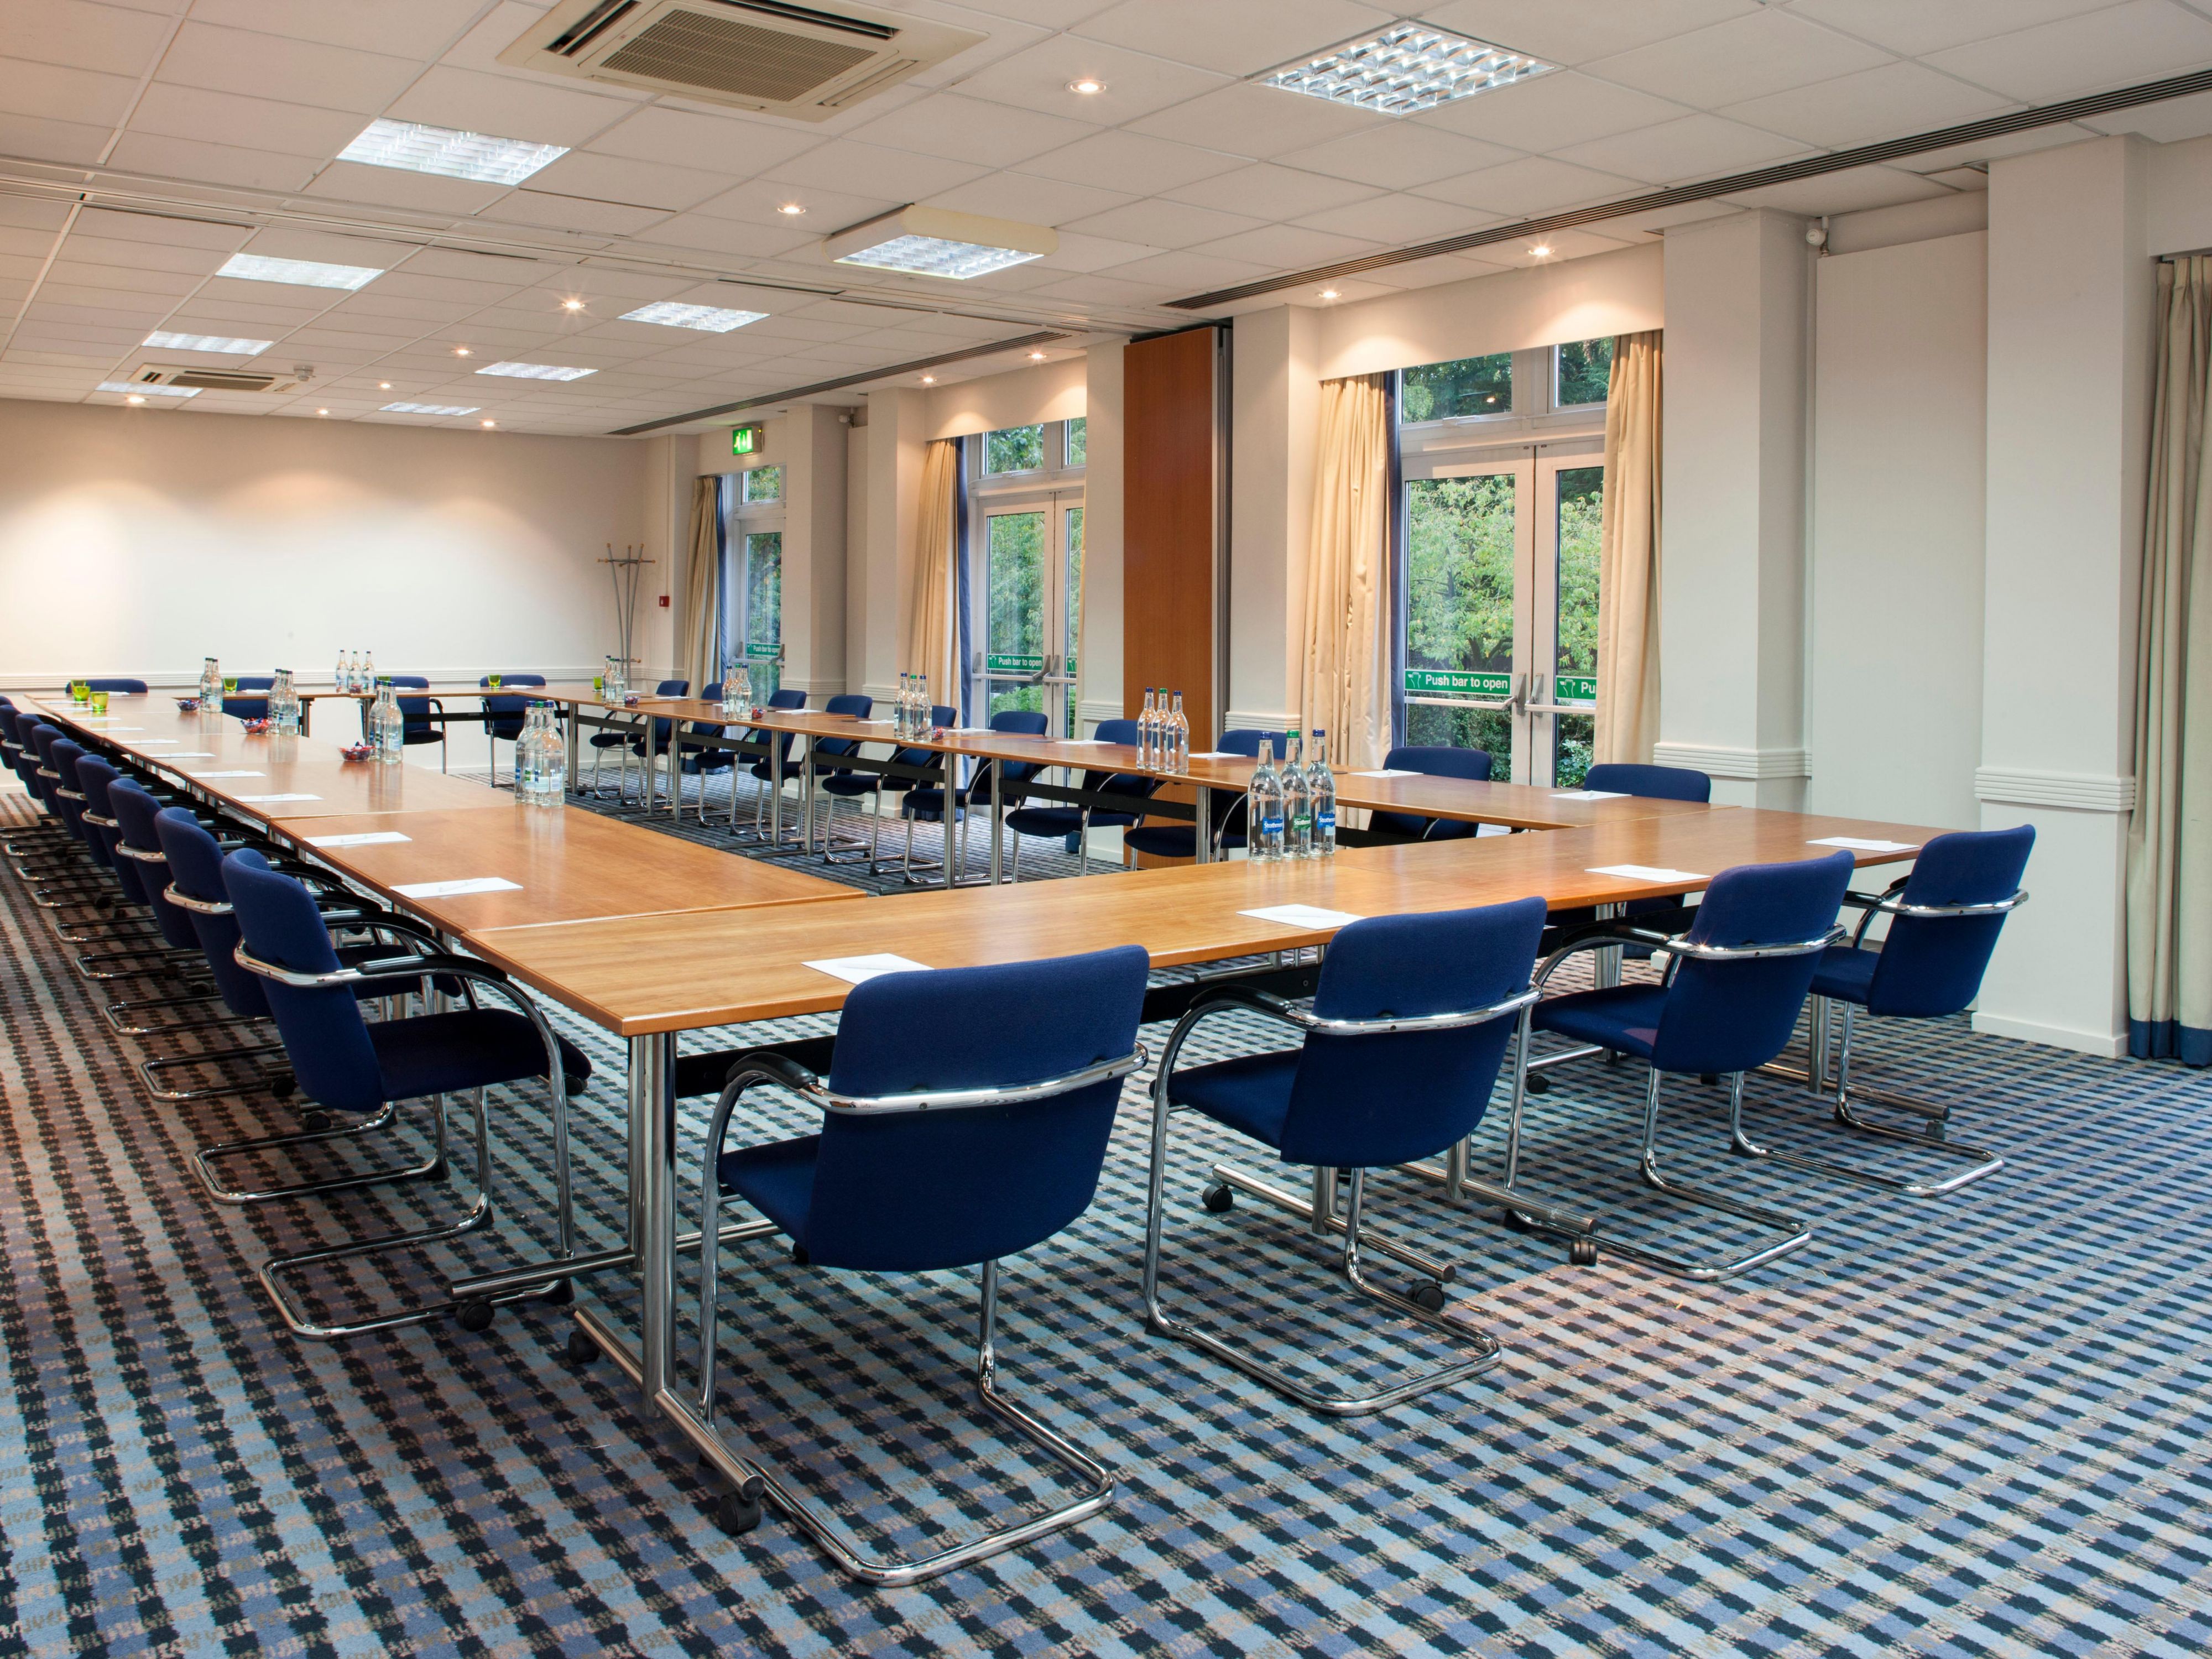 Looking for the perfect venue to host your next meeting? With us, you can build your ideal package, and our experienced staff will ensure your meeting runs smoothly.